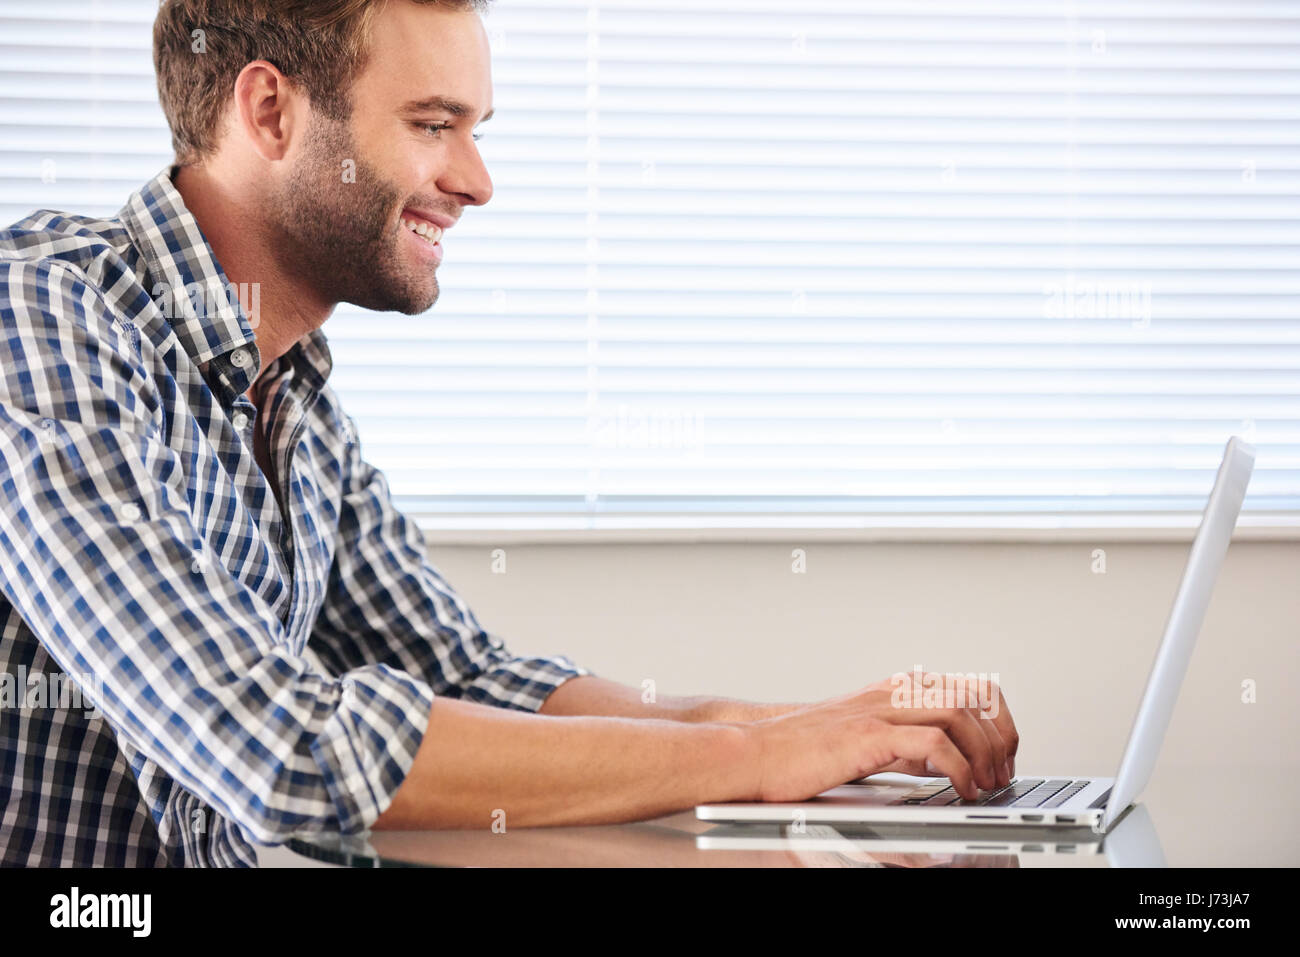 profile image of handsome groomed man typing on laptop computer Stock Photo